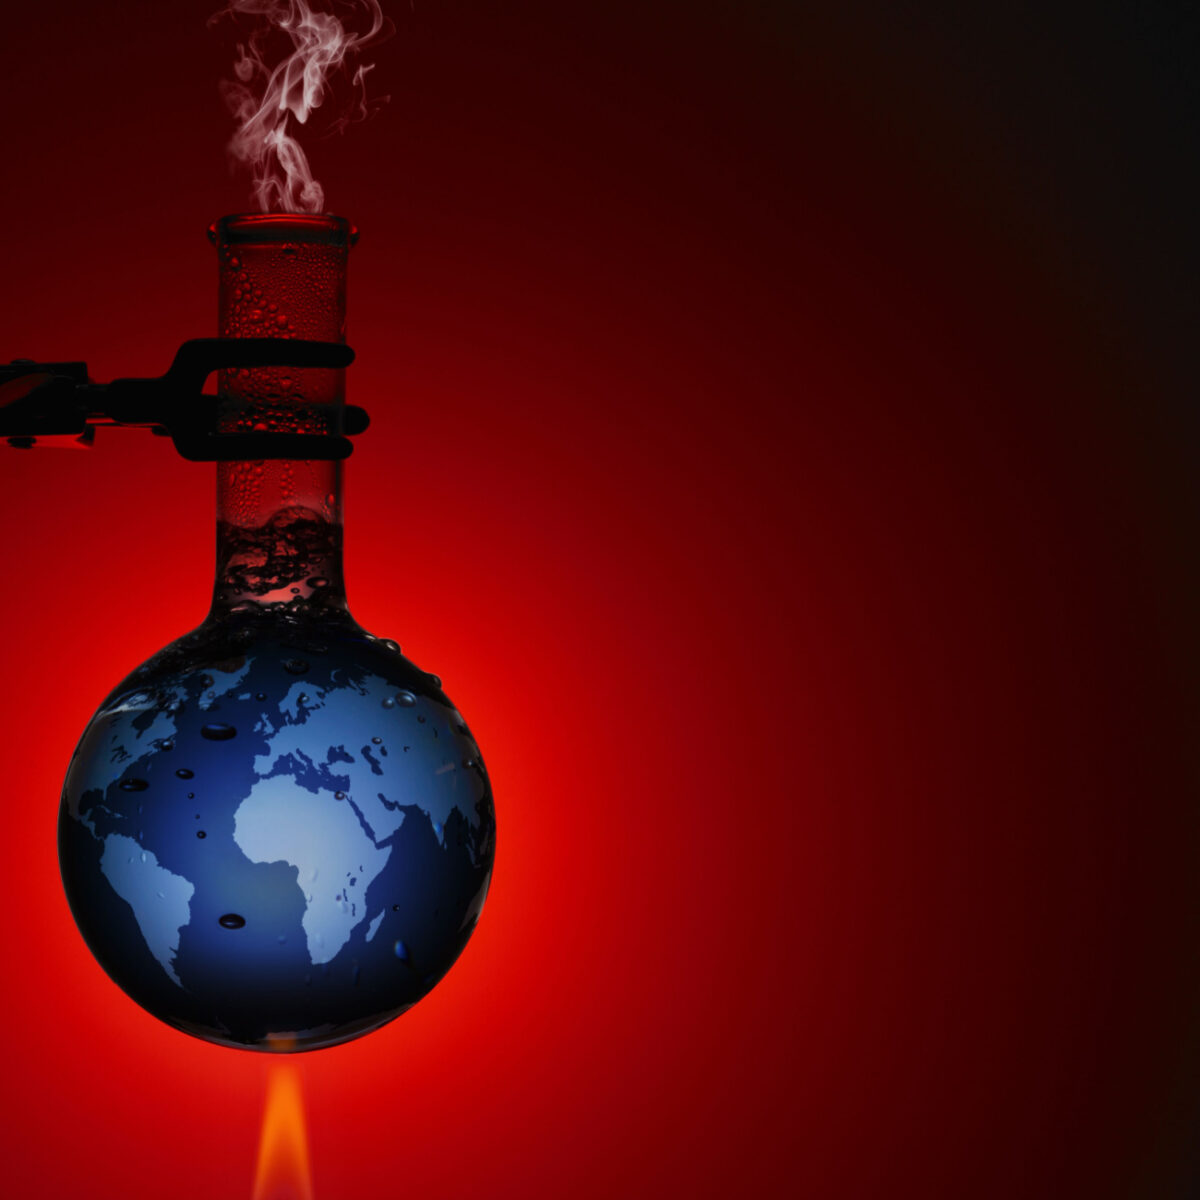 Global Boiling”: An Assault On Reason and Science